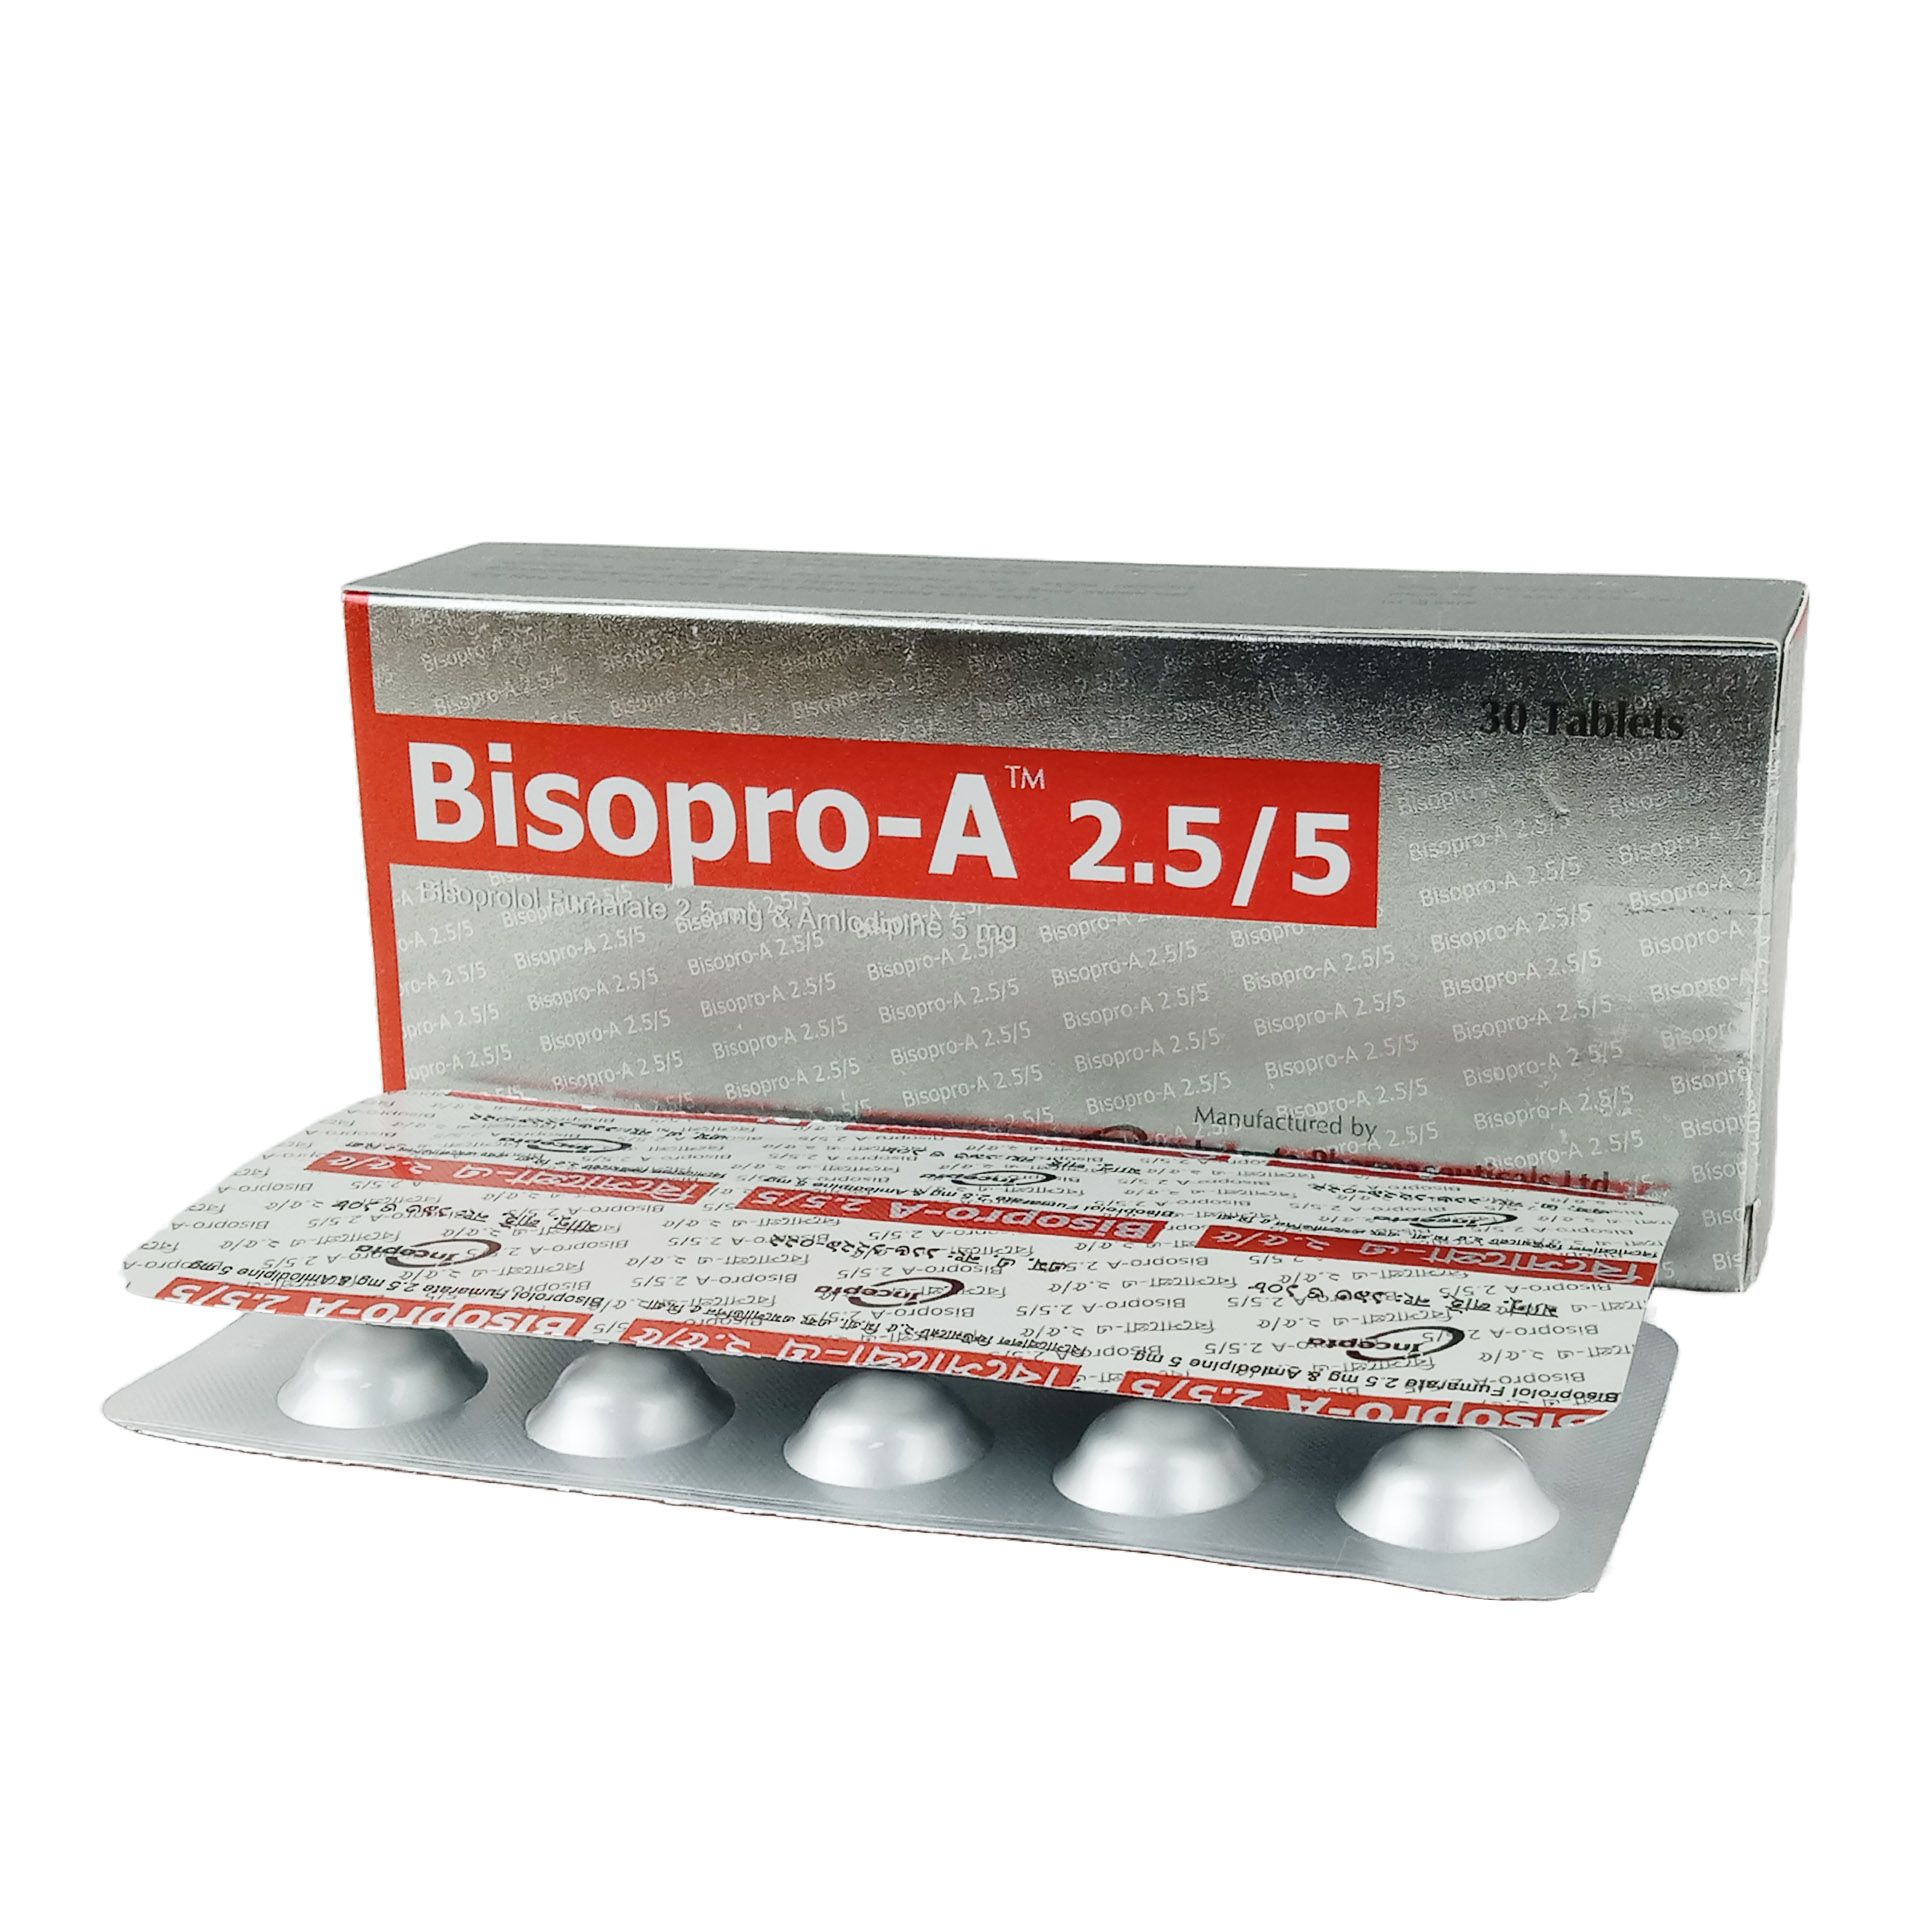 Bisopro-A 2.5mg+5mg Tablet